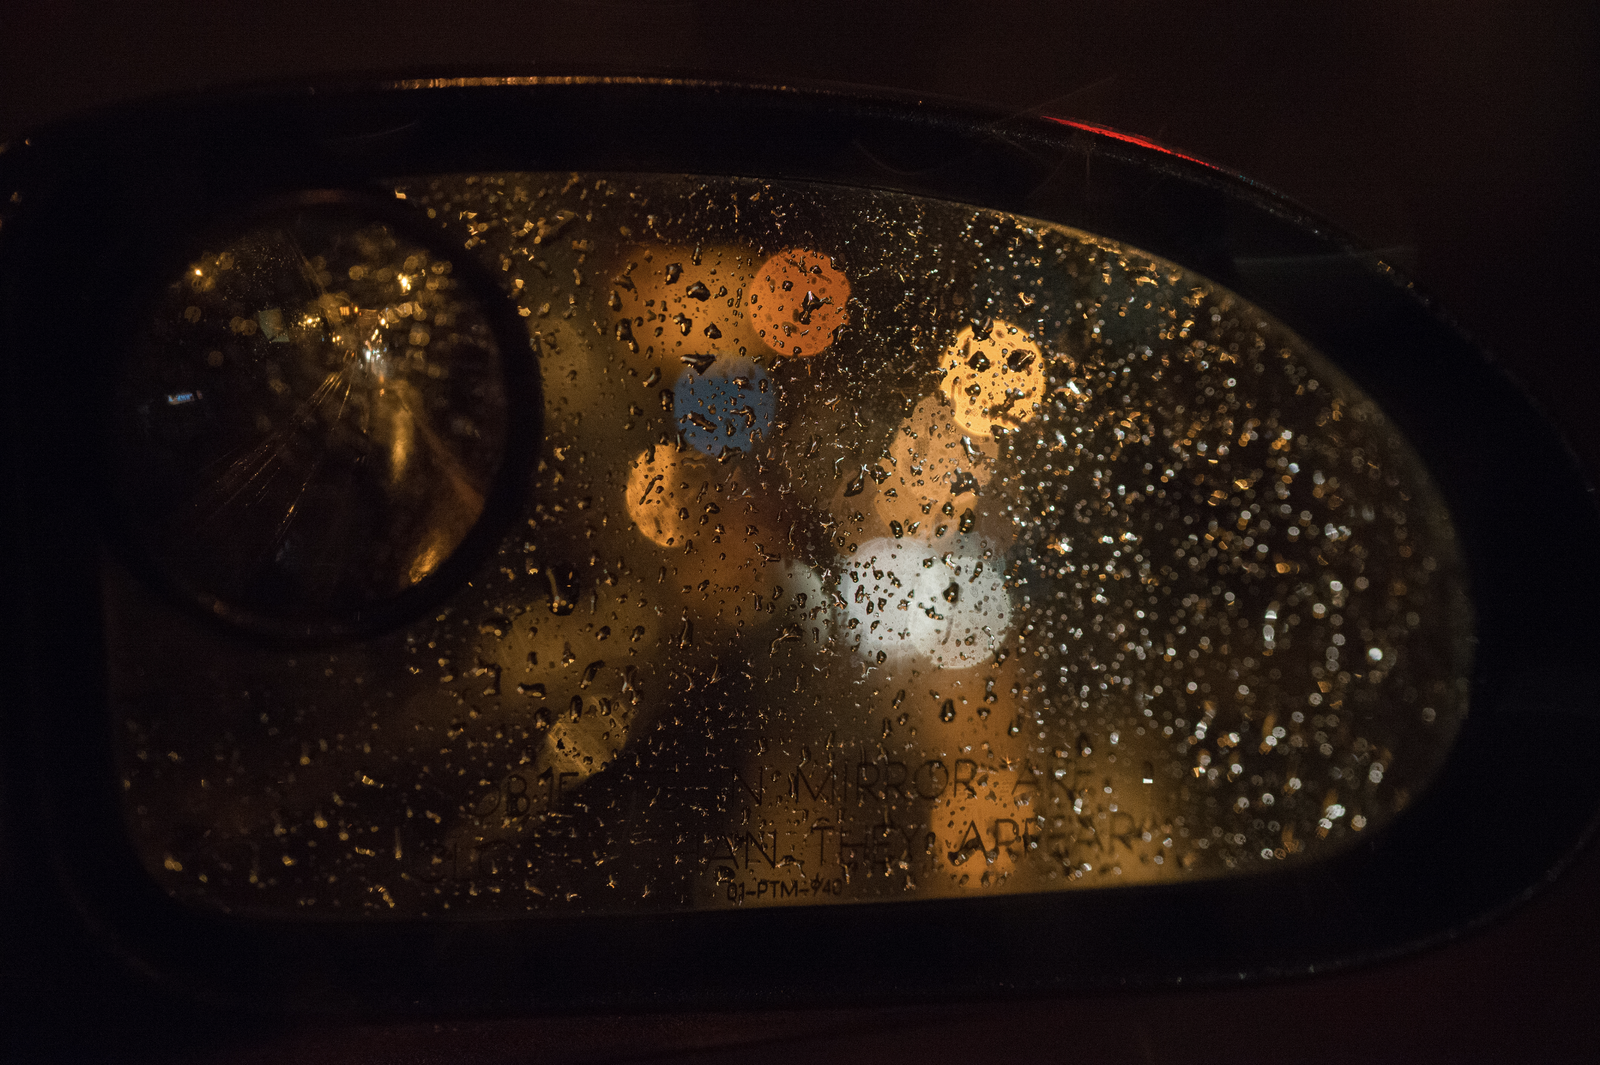 He looked around to see... - My, Bokeh, Reflection, Minsk, Nikon